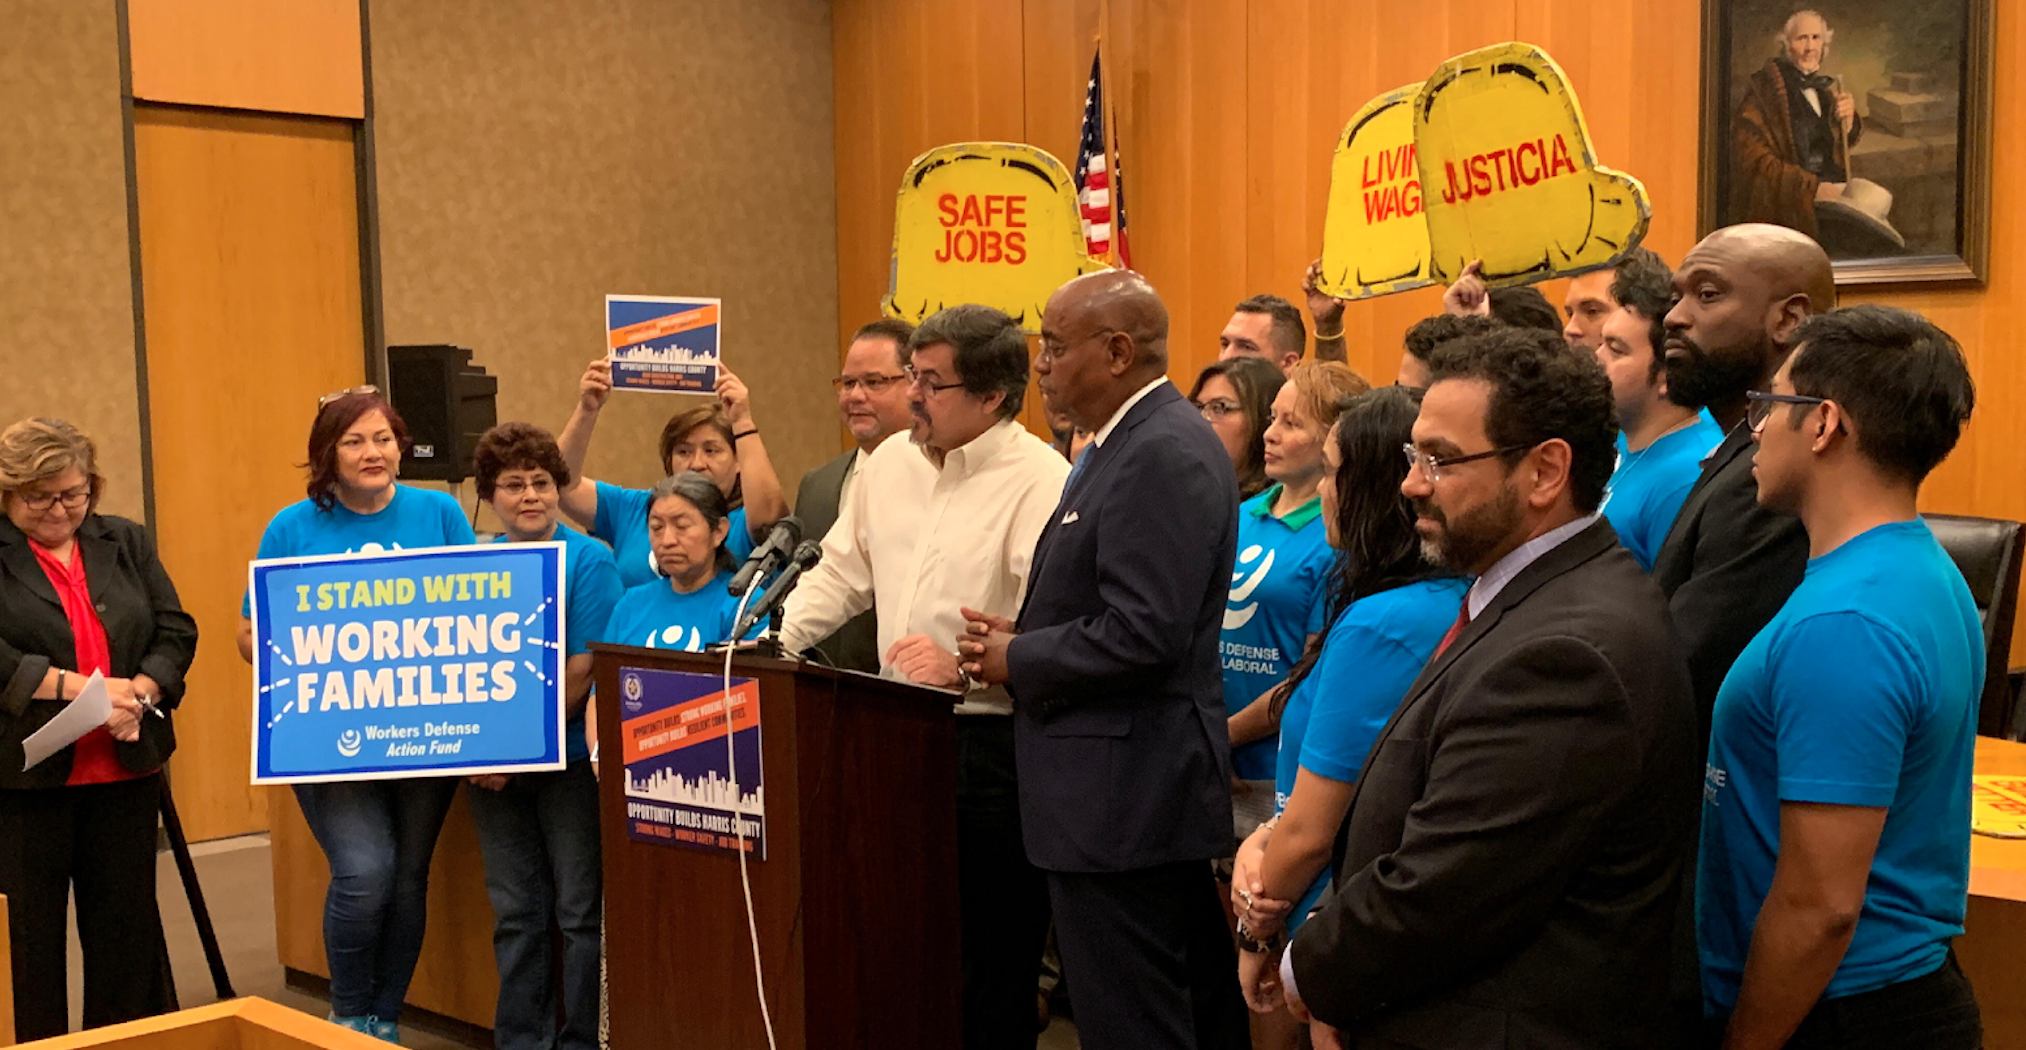 Labor and community organizers with the Build Houston Better campaign, launched after Hurricane Harvey, and Houston Mayor Sylvester Turner announce a major legislative win to improve worker protection, wages and training access. Credit: Worker’s Defense 